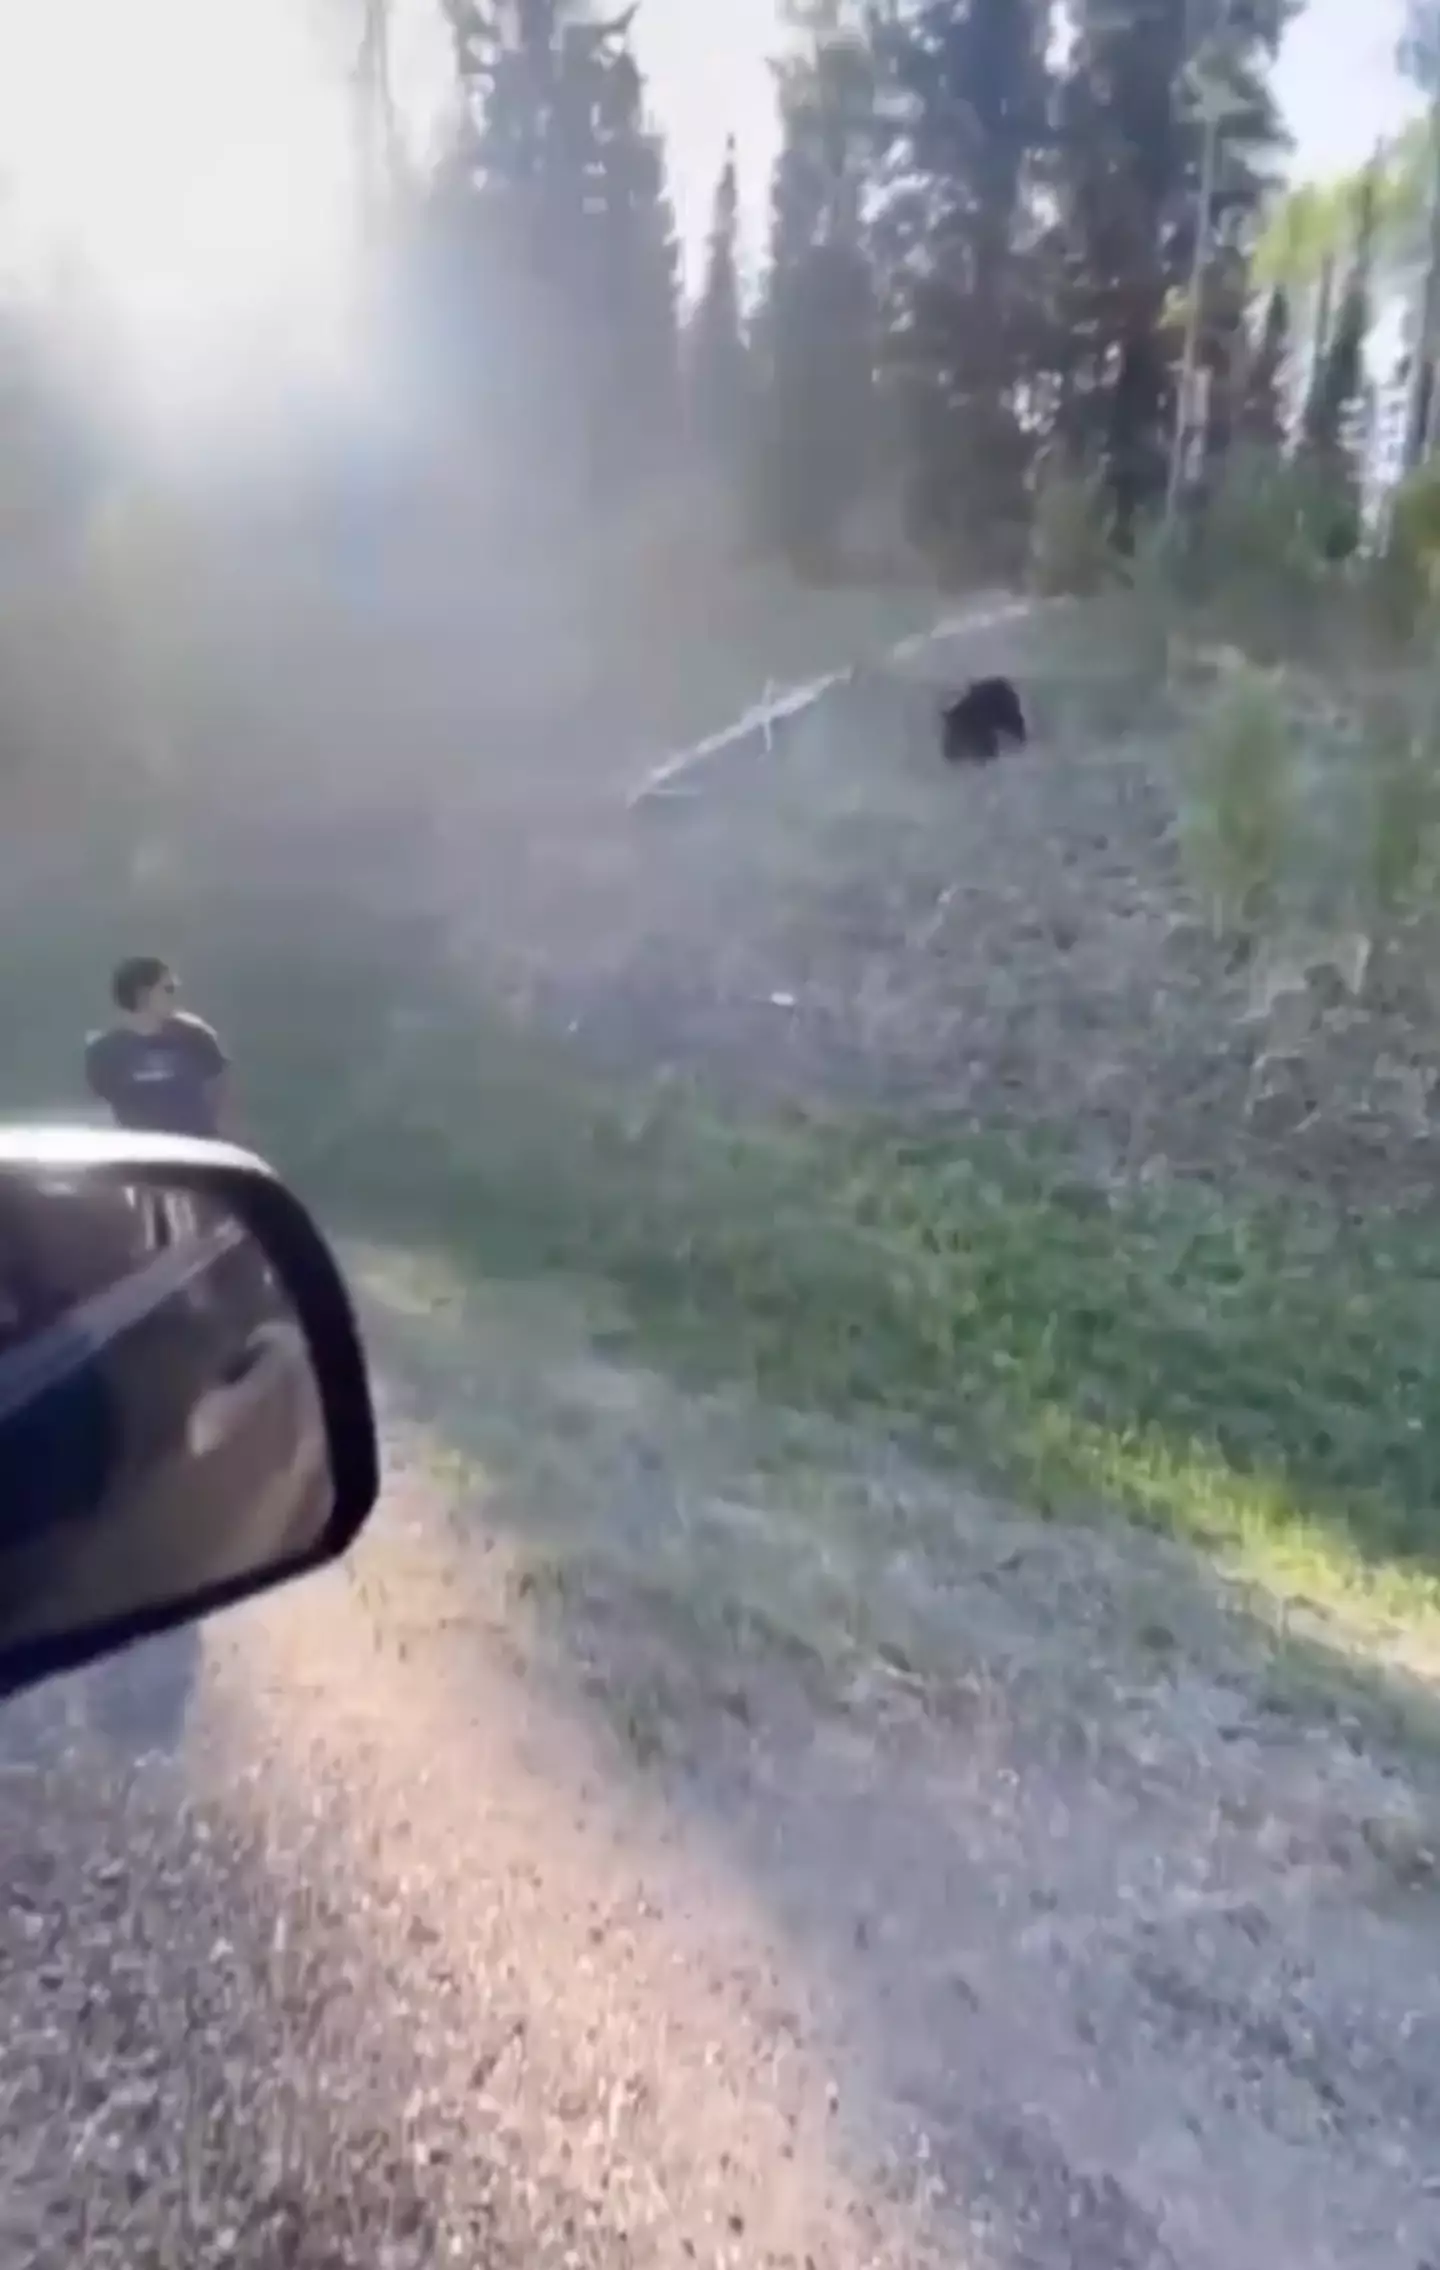 The black bear appears to be fed up of his behaviour and chases the man.